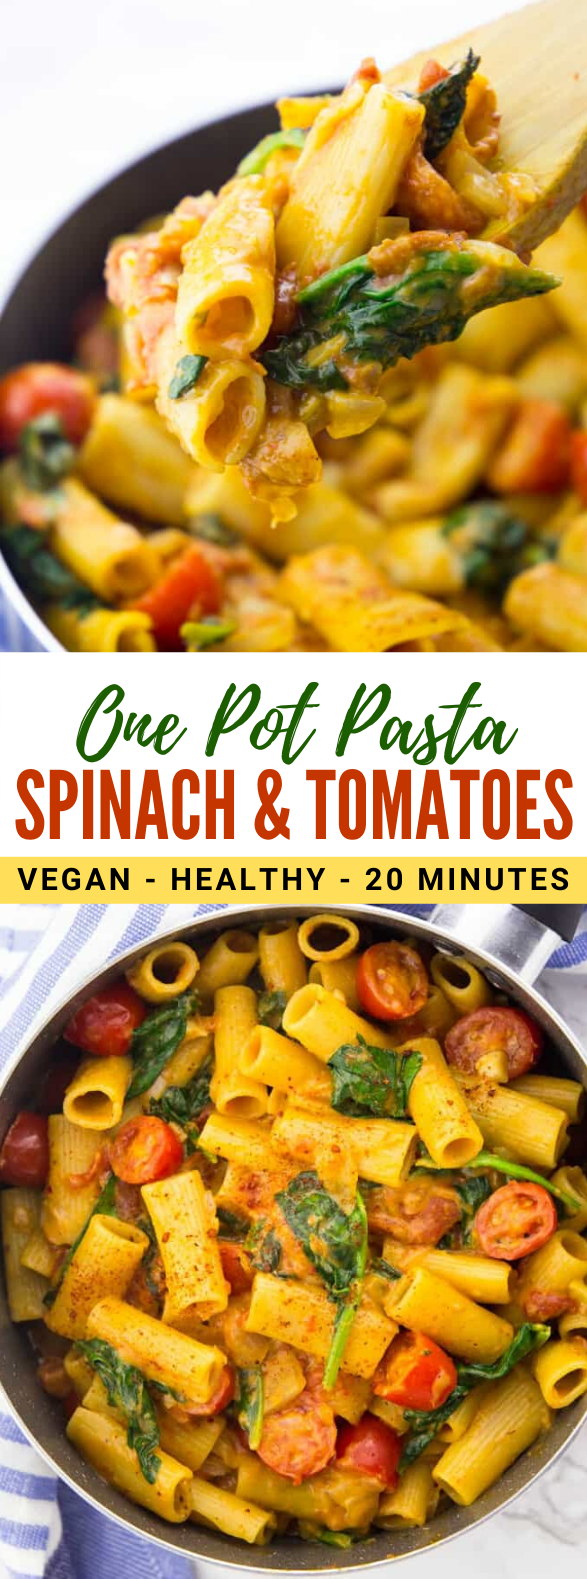 VEGAN ONE POT PASTA WITH SPINACH AND TOMATOES #veggies #weeknight